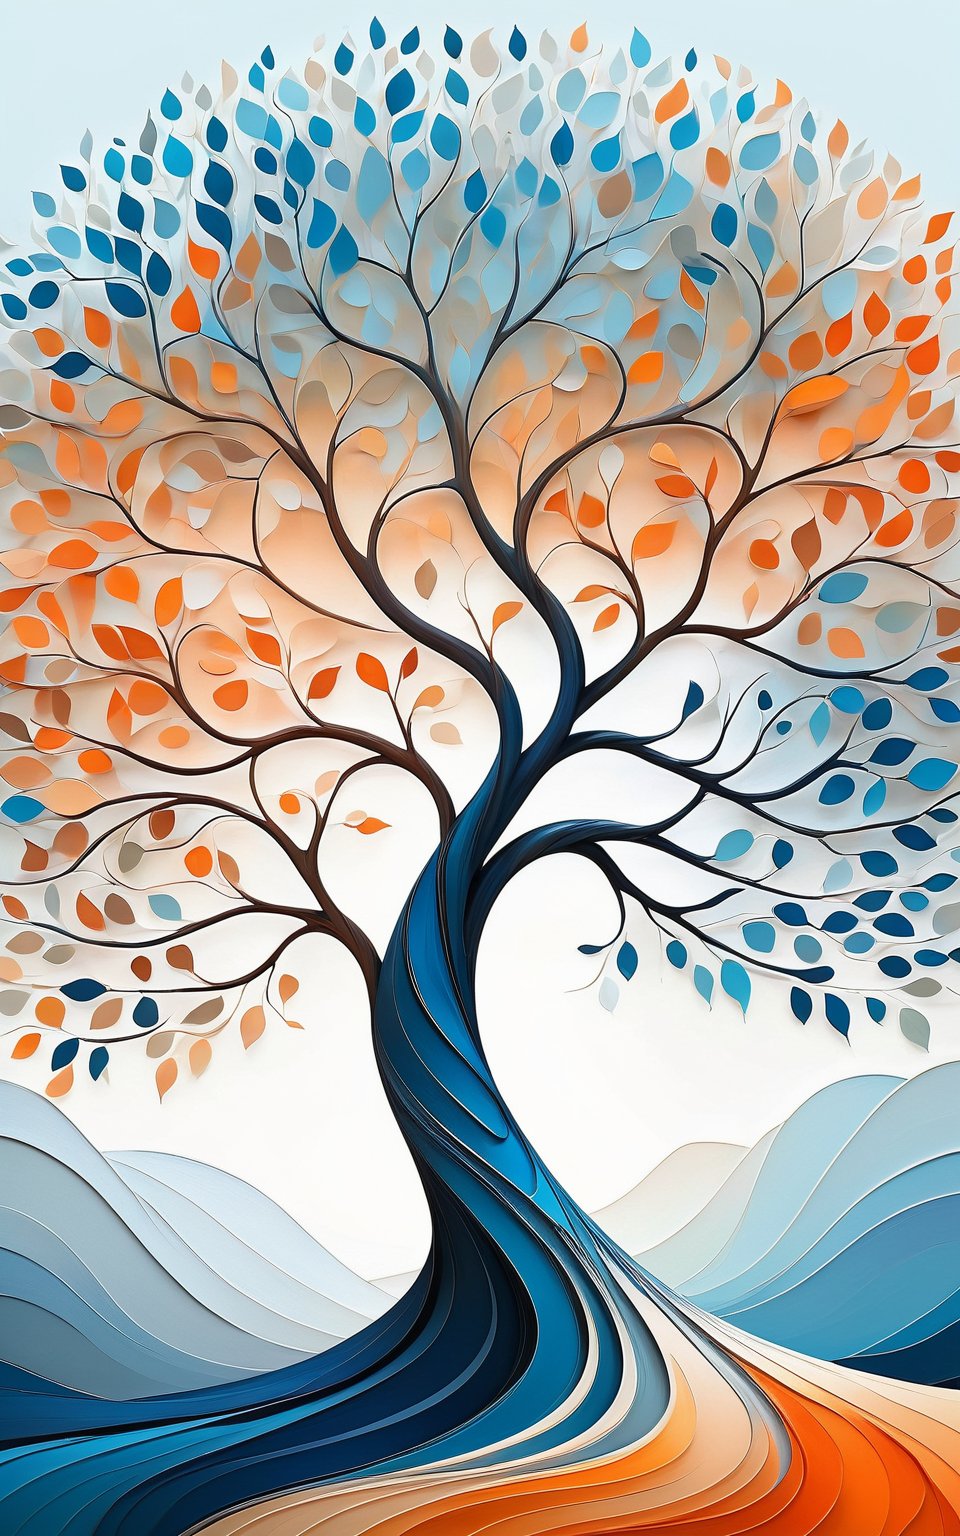 (high quality, digital art, abstract landscape, muted colors, minimalistic), a stylized tree with an intricate trunk, large and swirling abstract foliage in shades of blue, orange, and white, impressionistic and painterly style, serene and calm atmosphere, smooth and flowing brushstrokes, high contrast, subtle gradient background, ethereal and artistic ambiance, creative and unique composition, high resolution, detailed textures, mesmerizing and captivating design